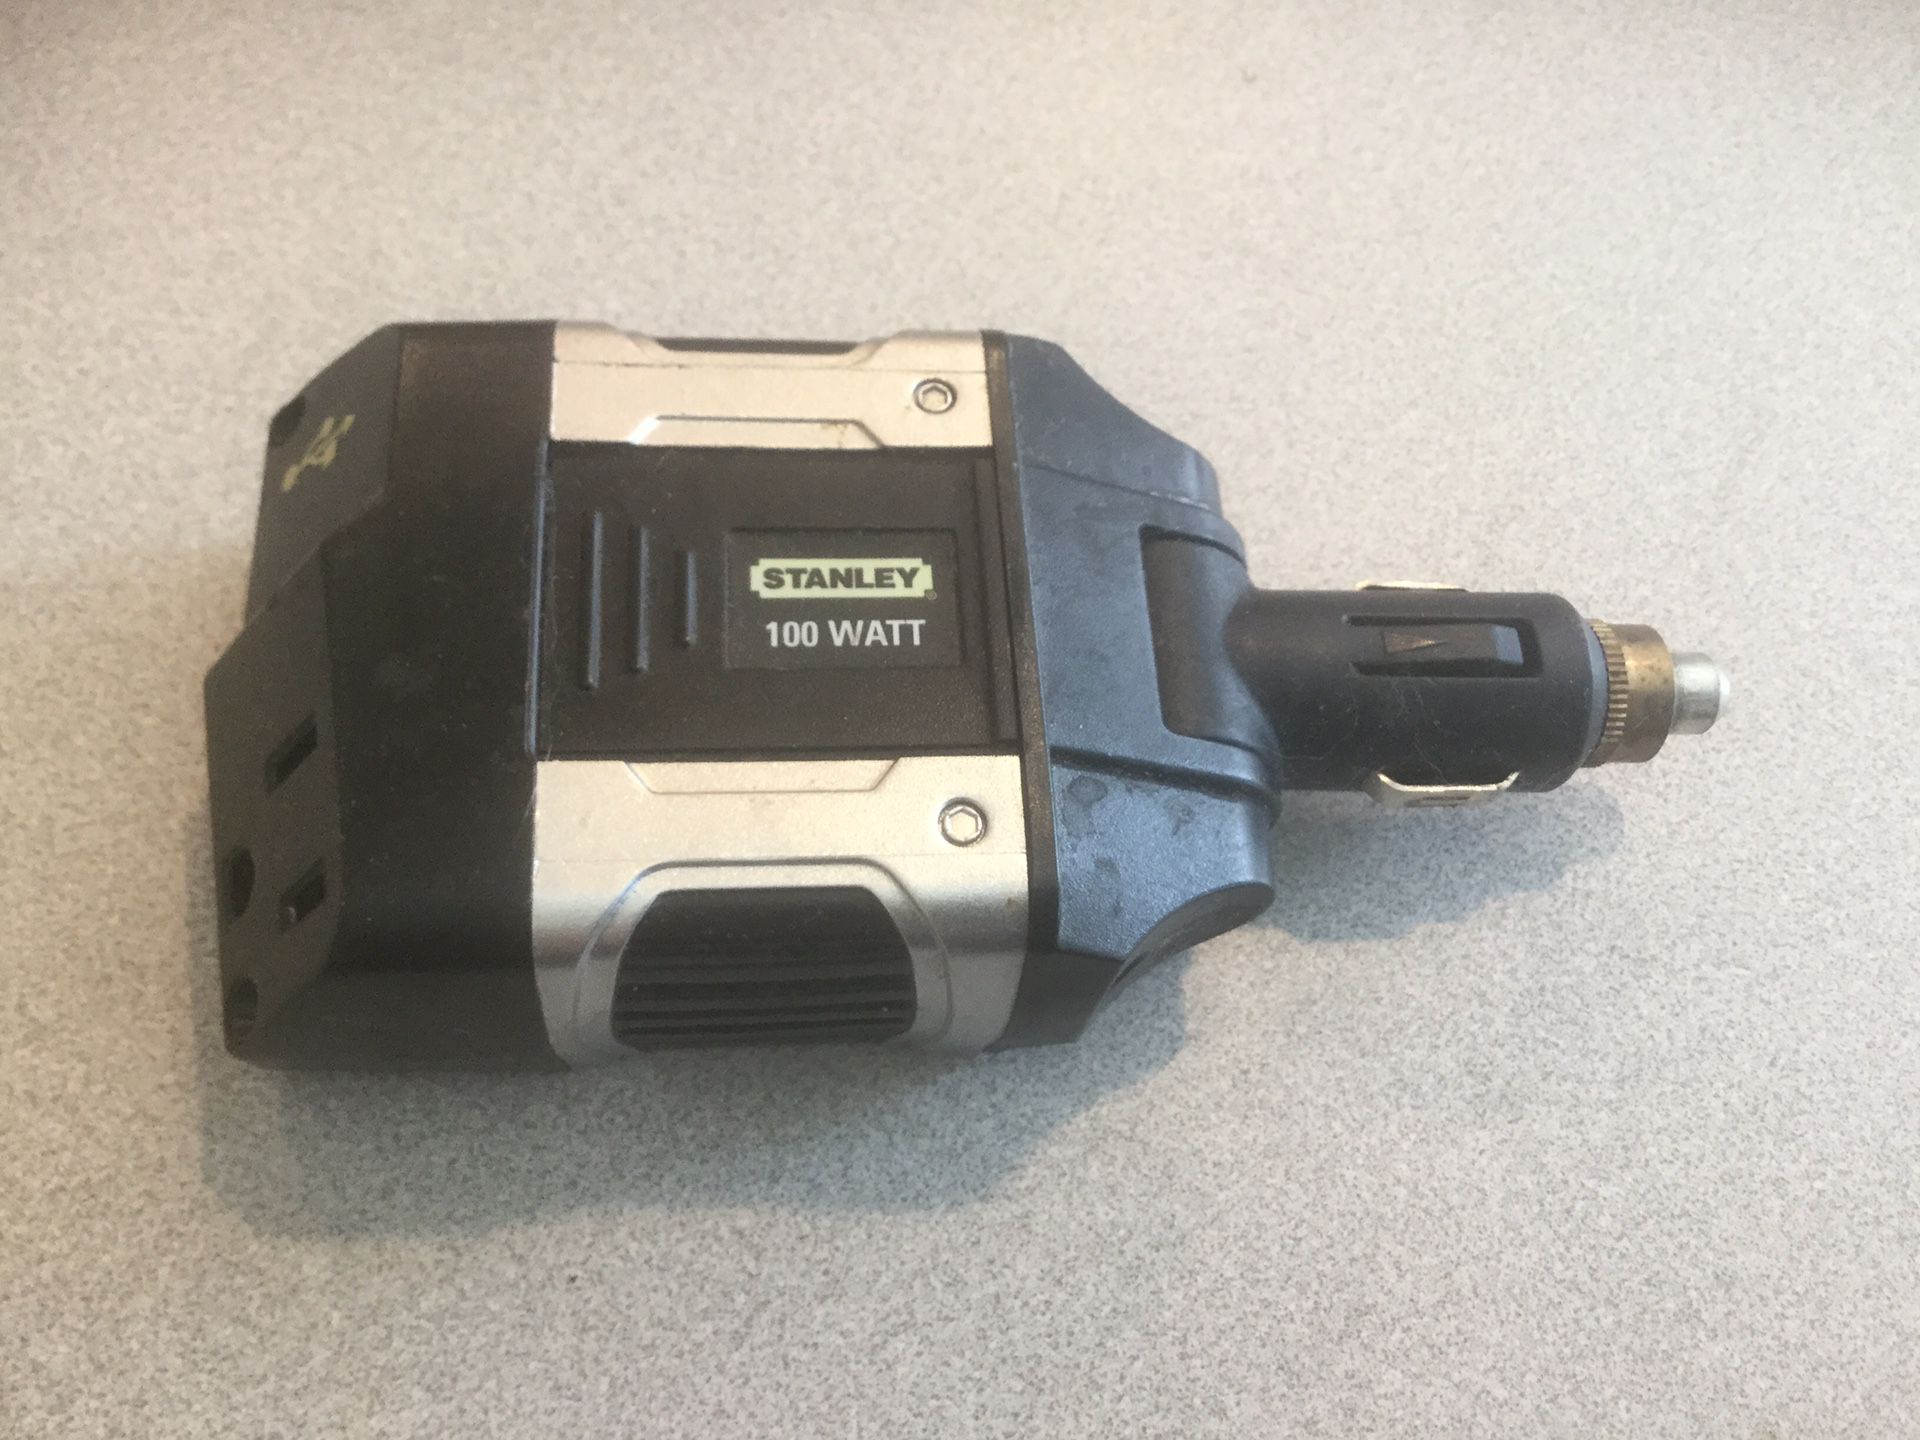 Car electric adapter